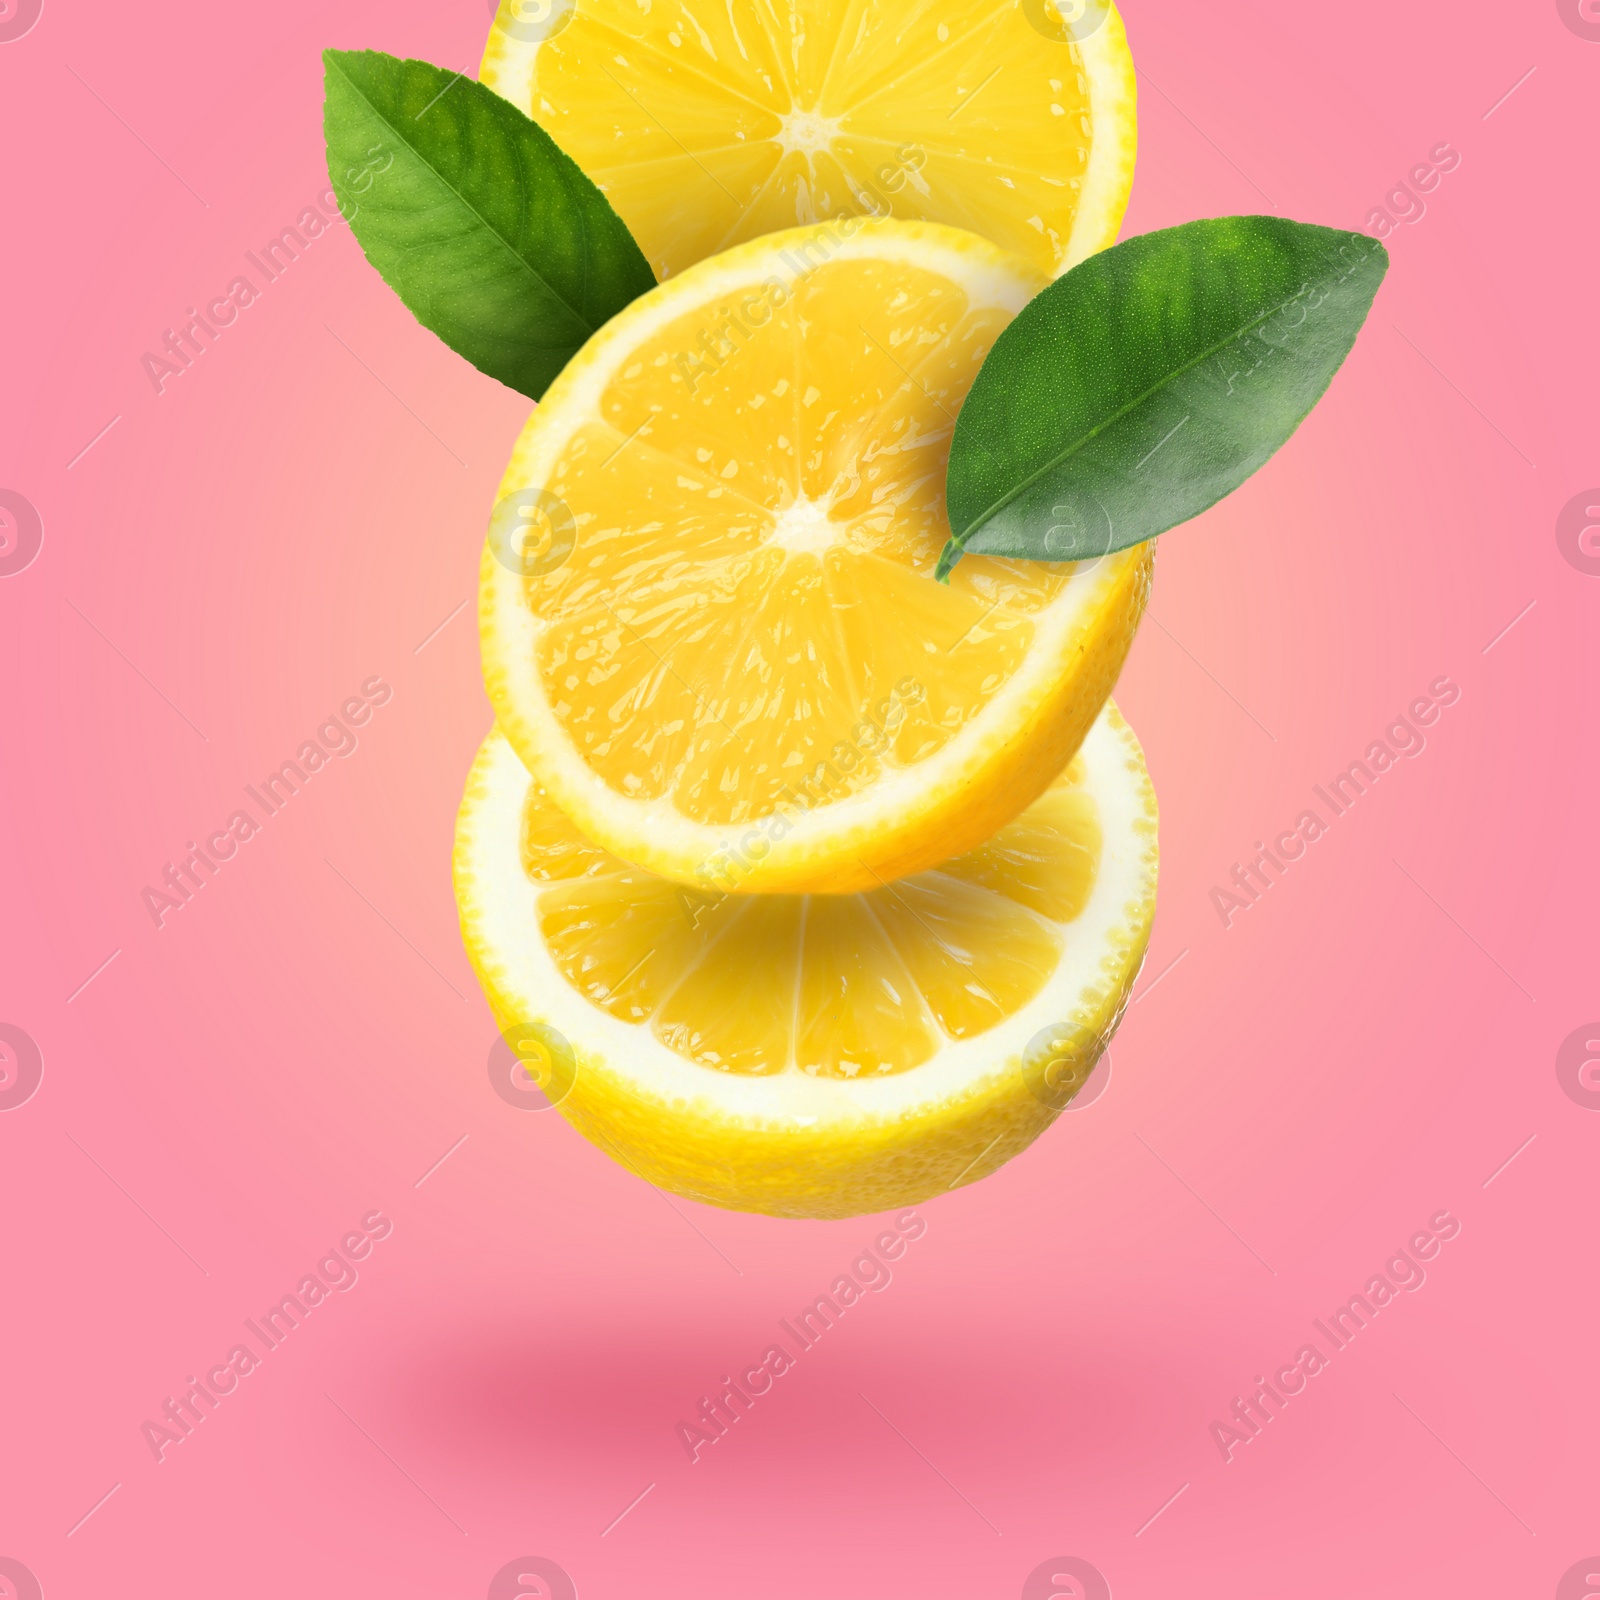 Image of Cut fresh lemons with green leaves falling on hot pink background